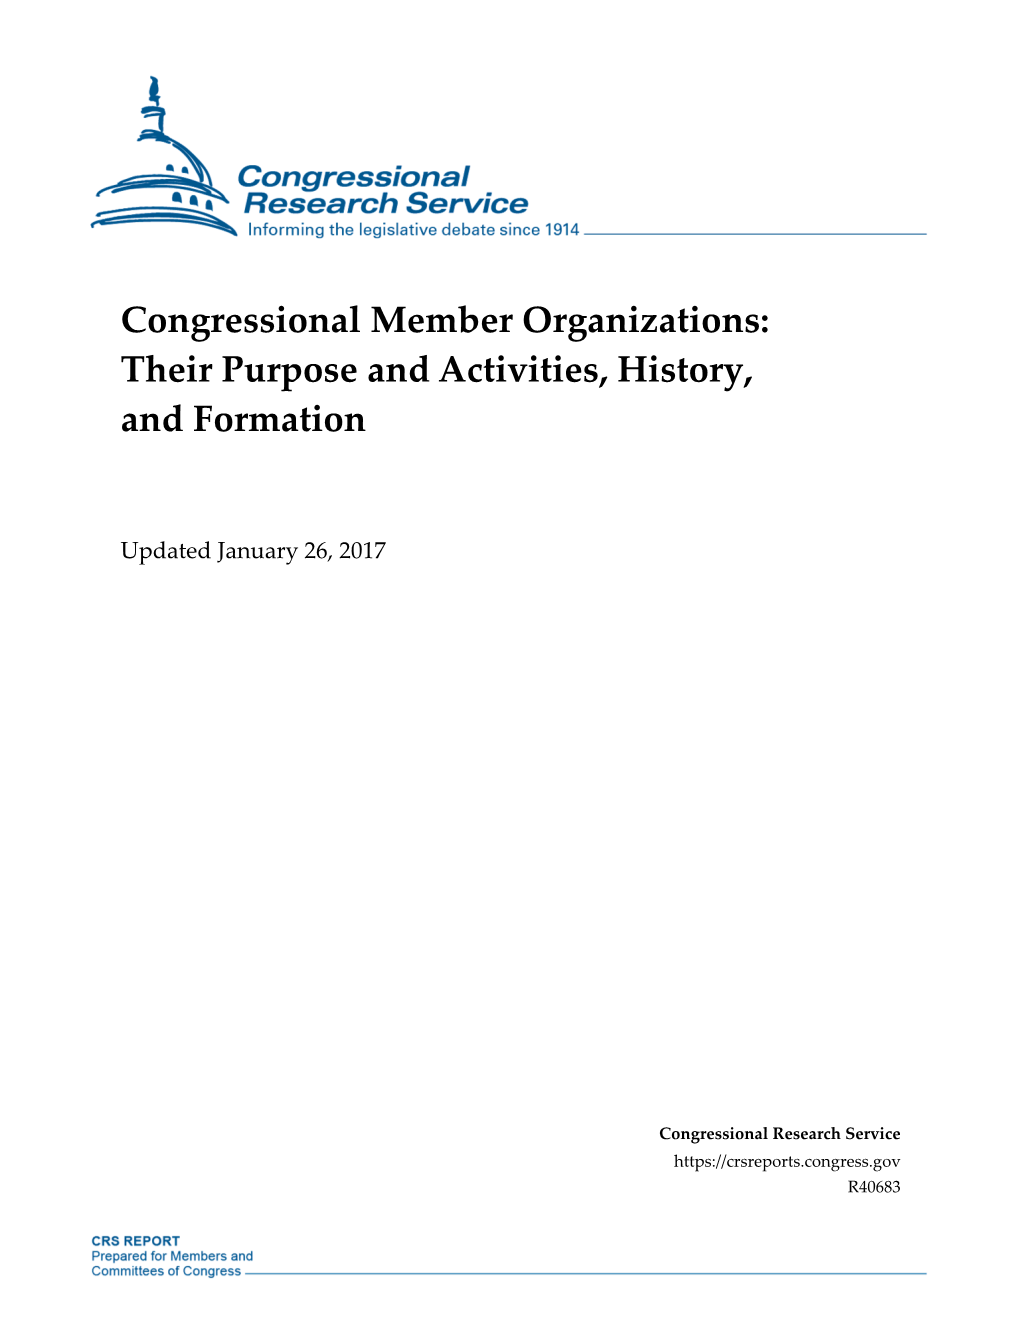 Congressional Member Organizations: Their Purpose and Activities, History, and Formation